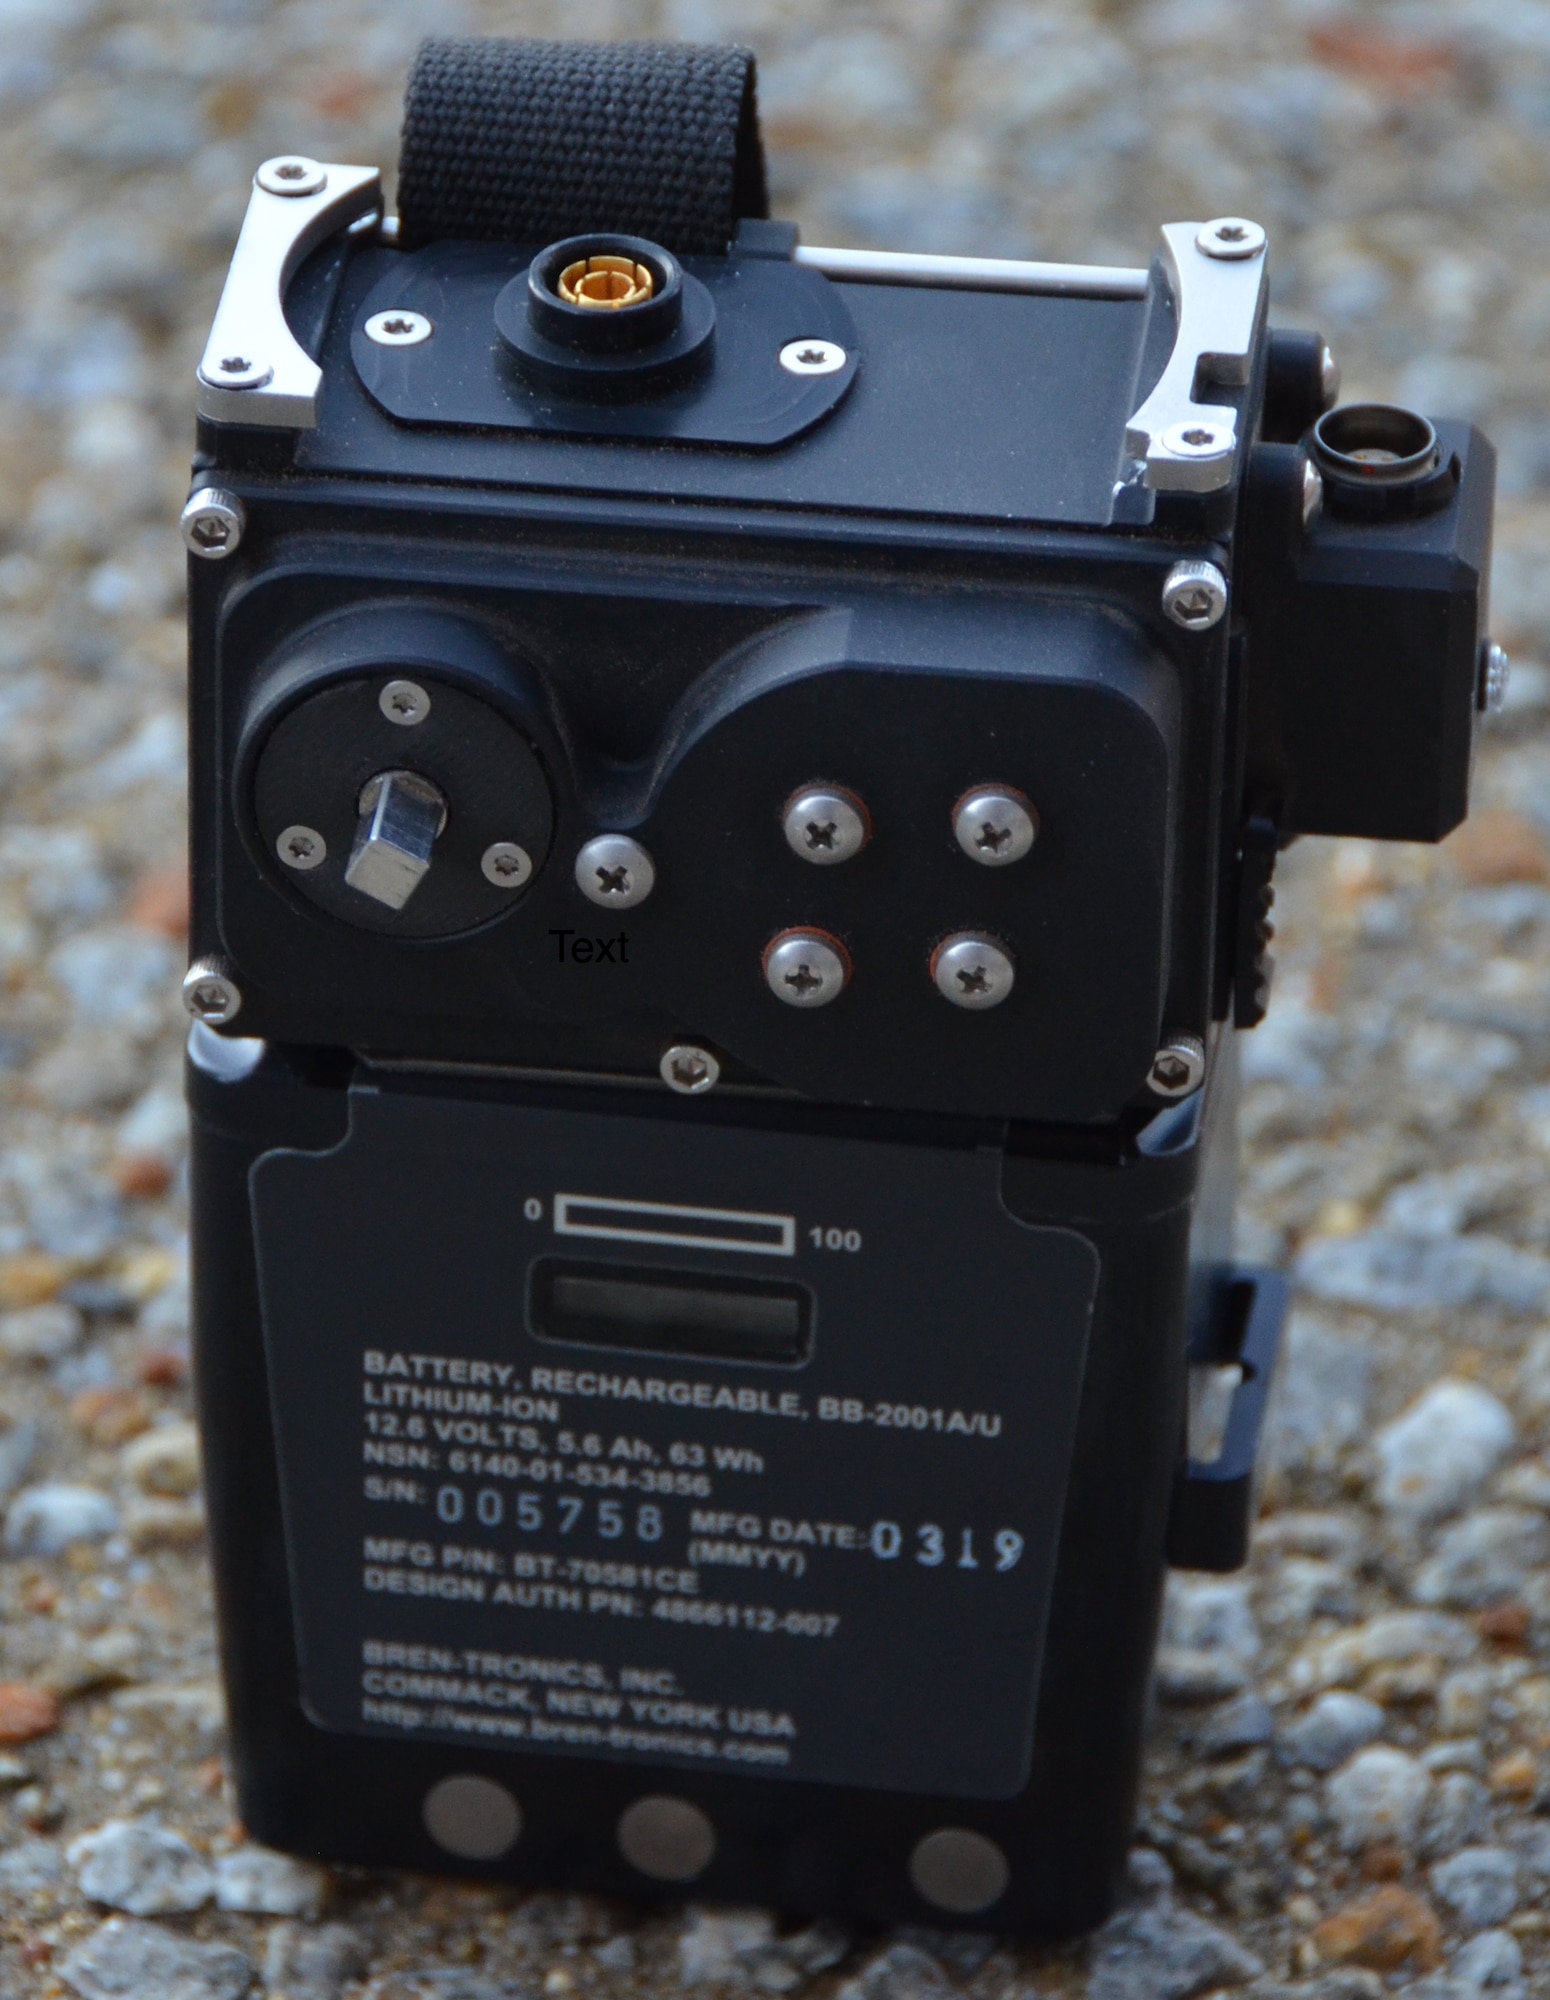 The portable “Surge Combat Survivor Evader Locator Tactical Charging Device” attaches to the CSEL radio’s battery, as shown here, providing compatibility for four different charging methods. (Photo courtesy of Combat Power Solutions, LLC)